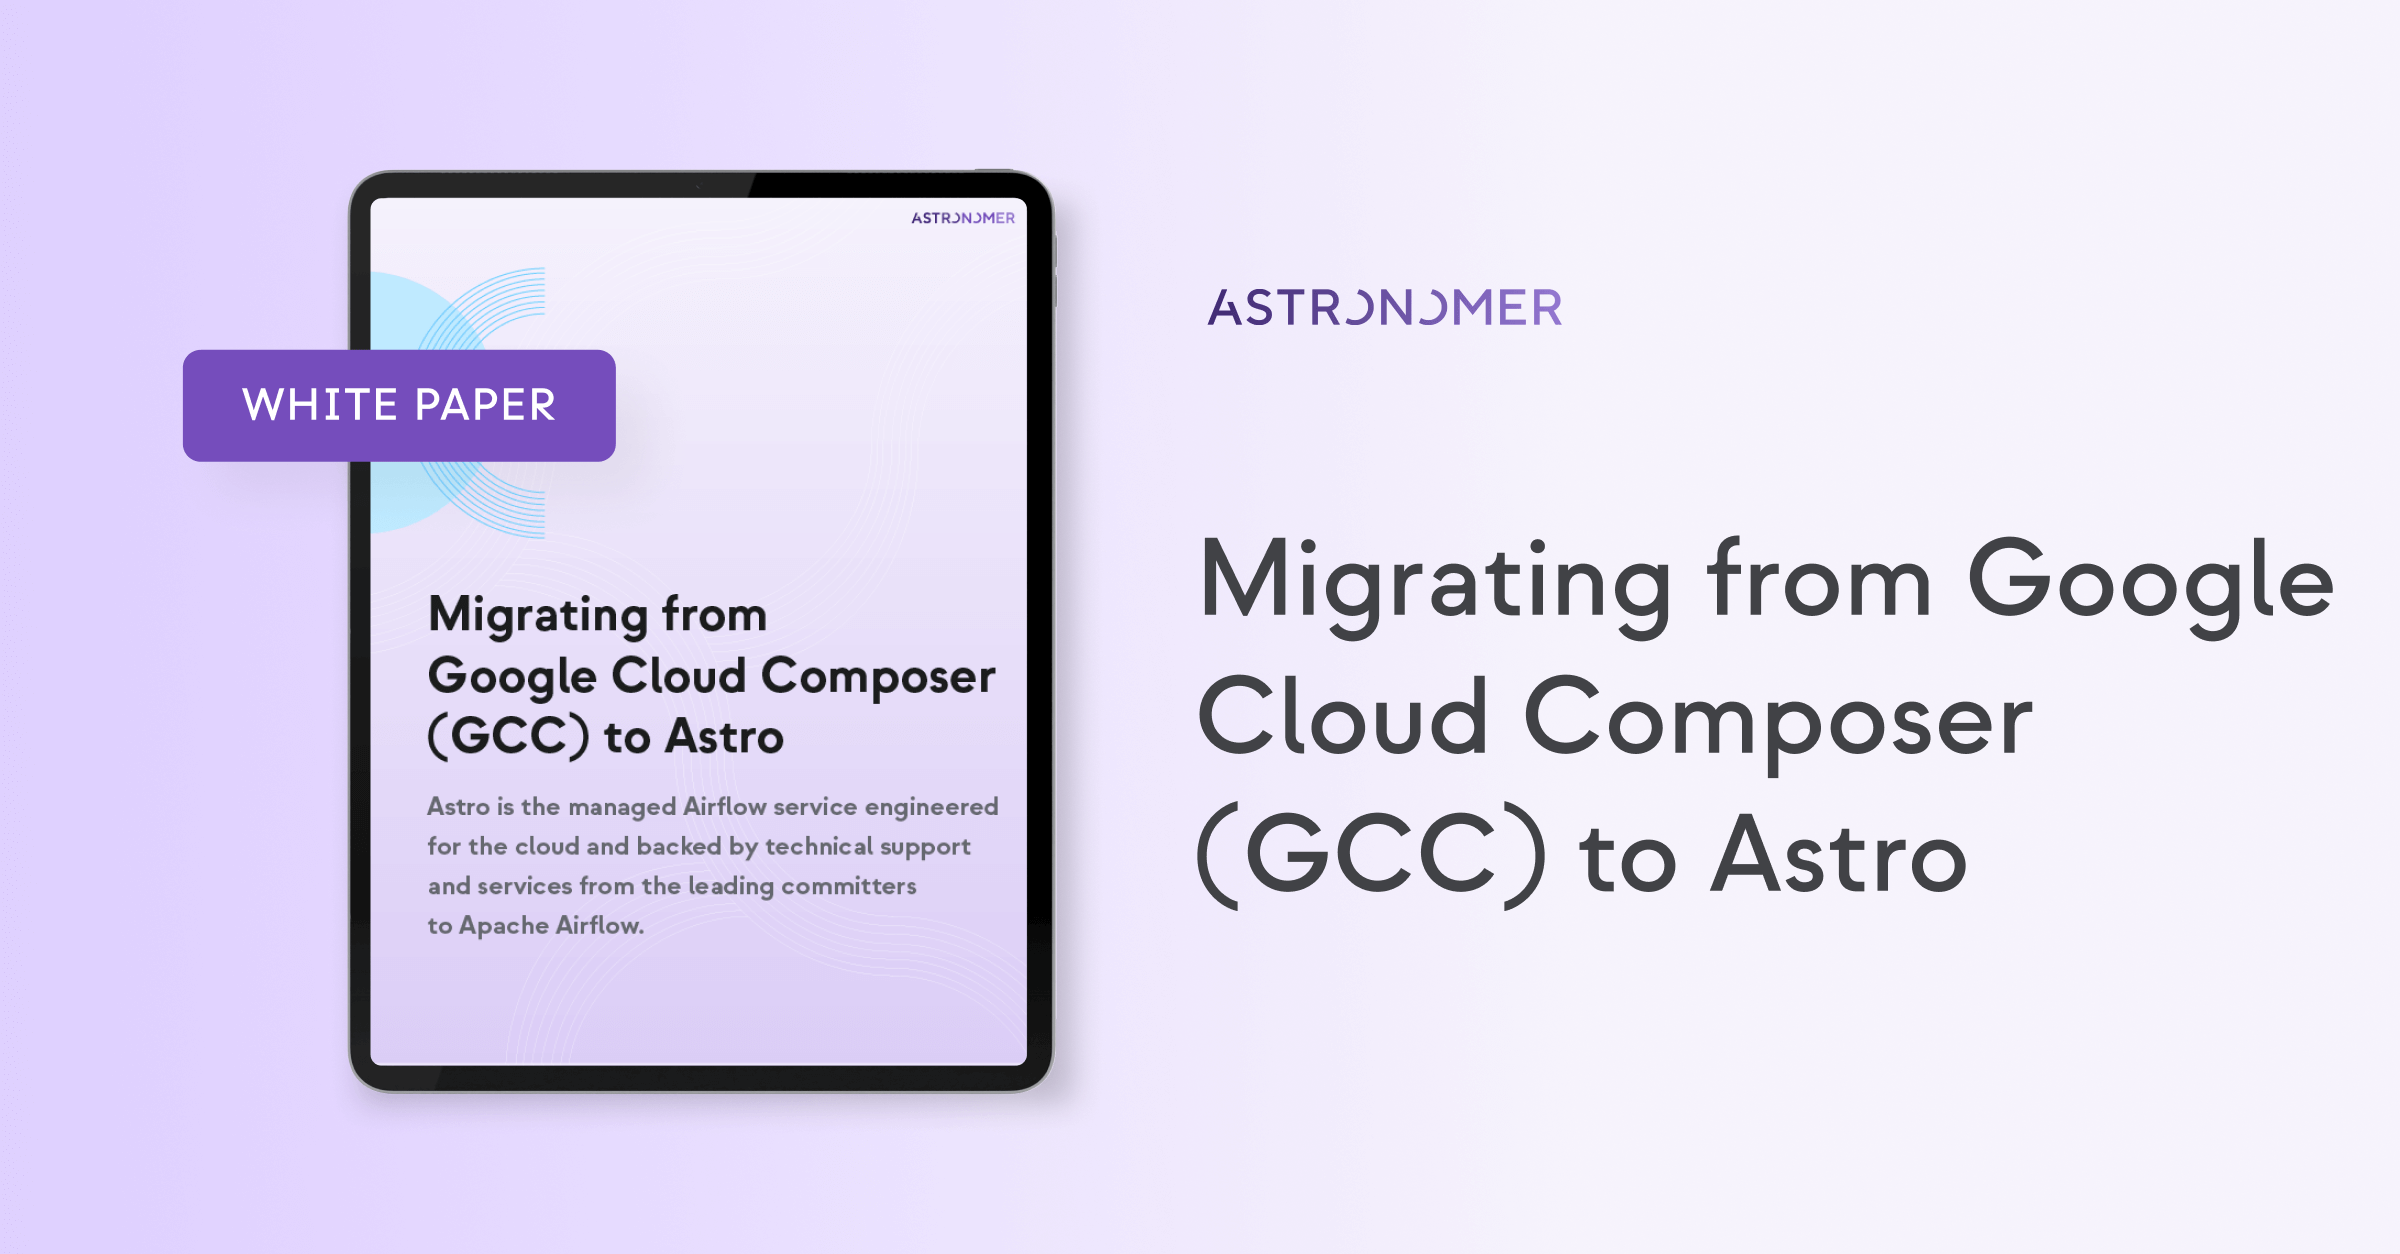 Migrating from Google Cloud Composer to Astro